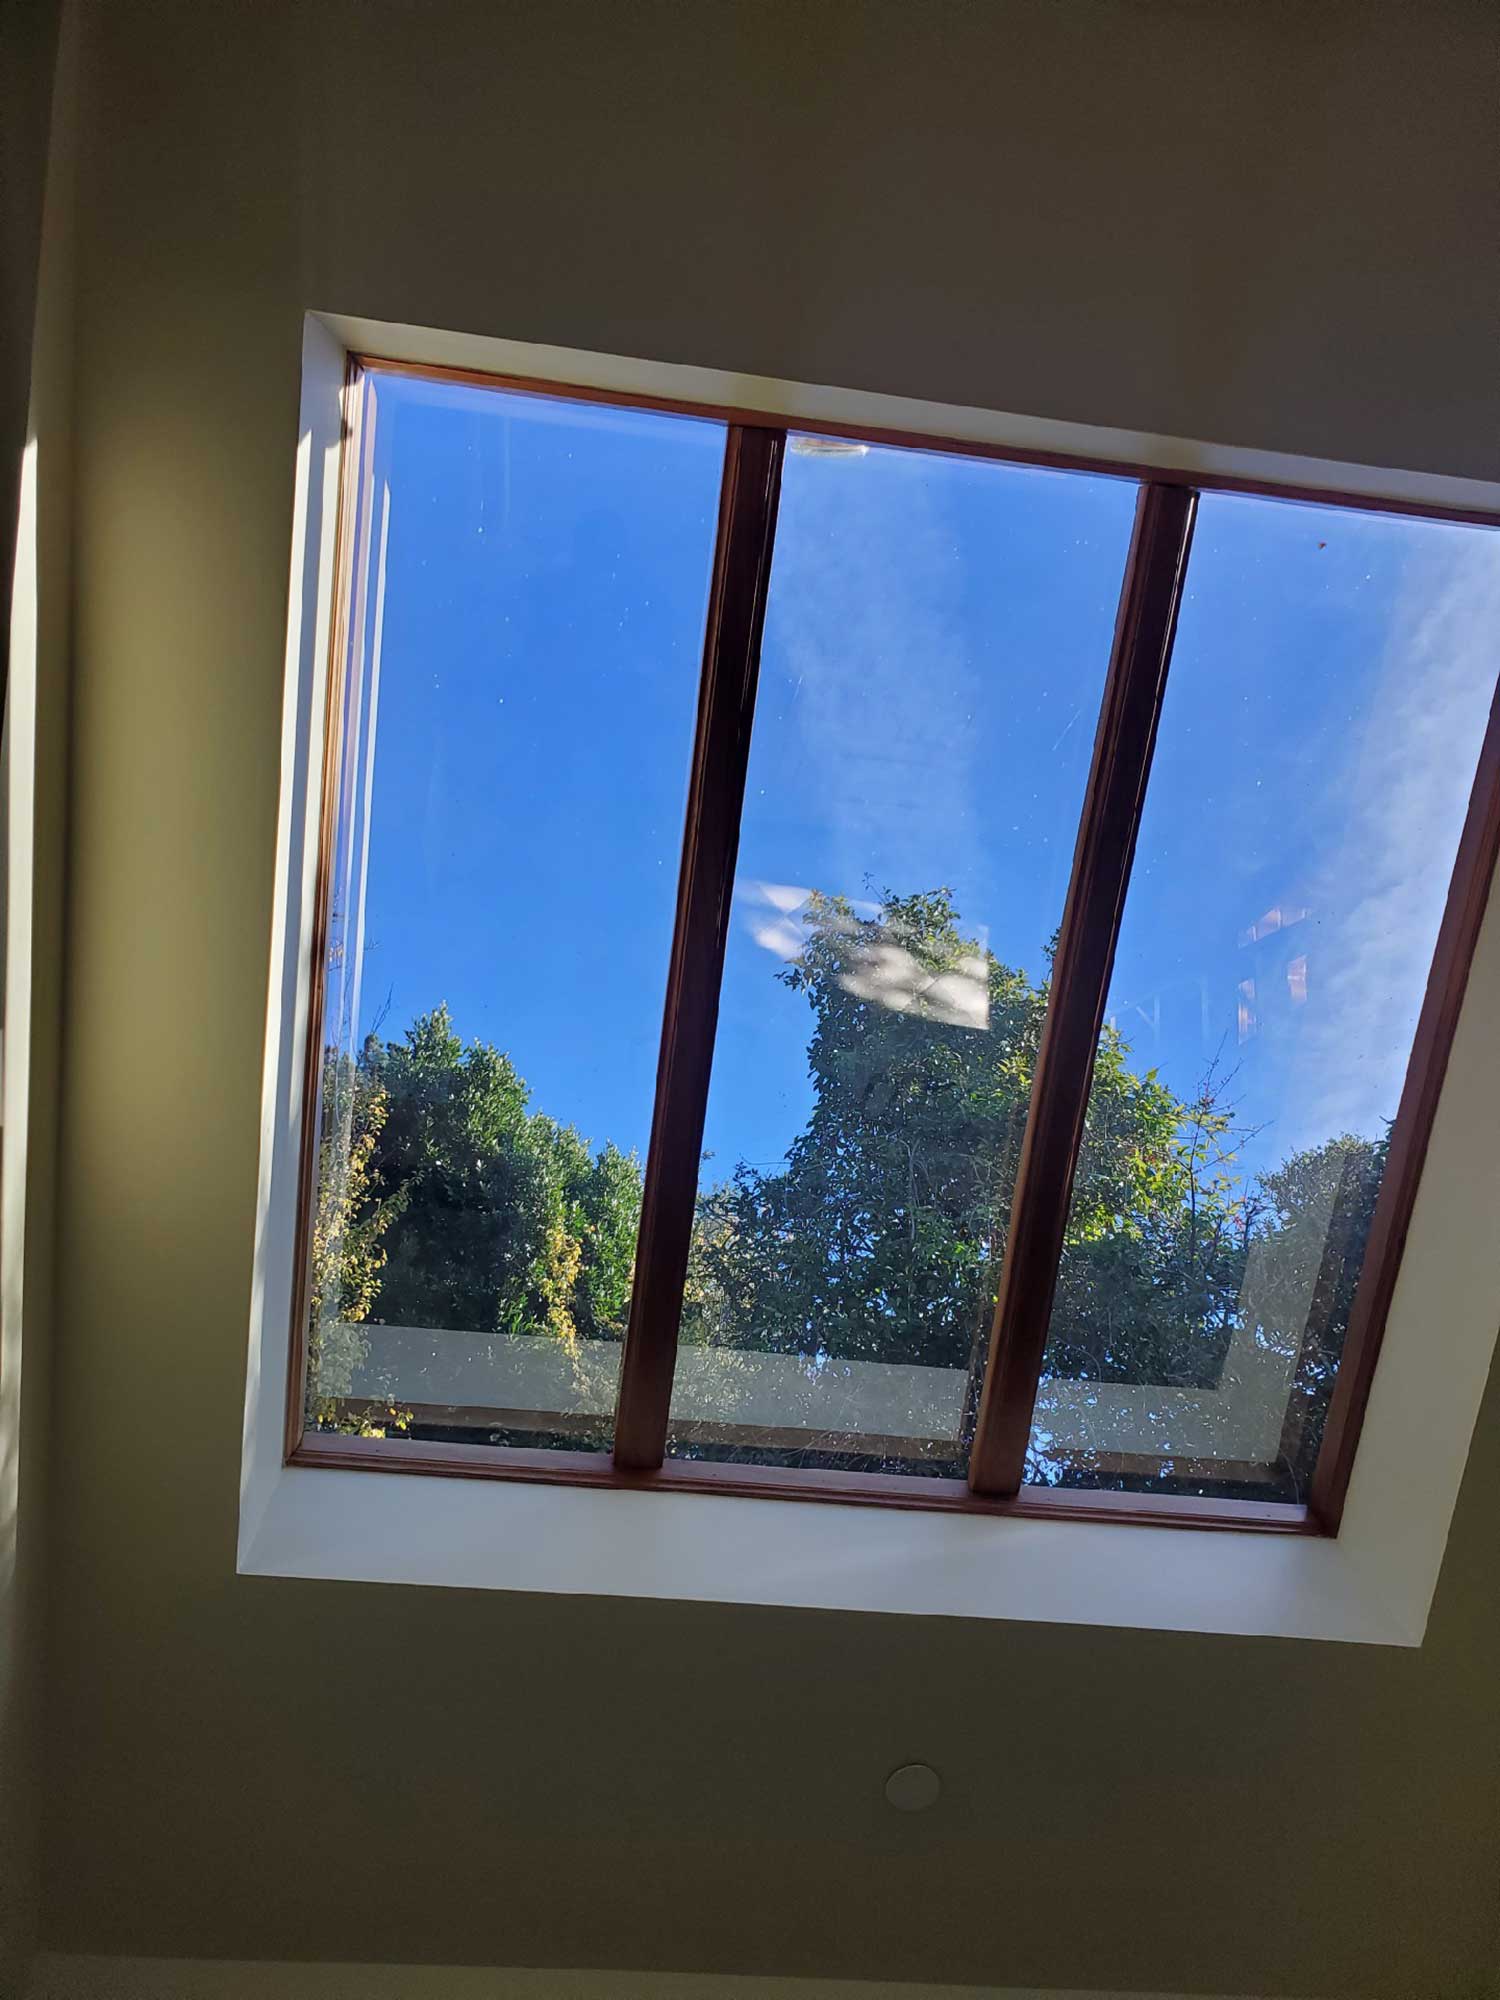 ClimatePro installed 3M Sun Control Window Film on skylights in this Belvedere, CA home. Get a free estimate today.